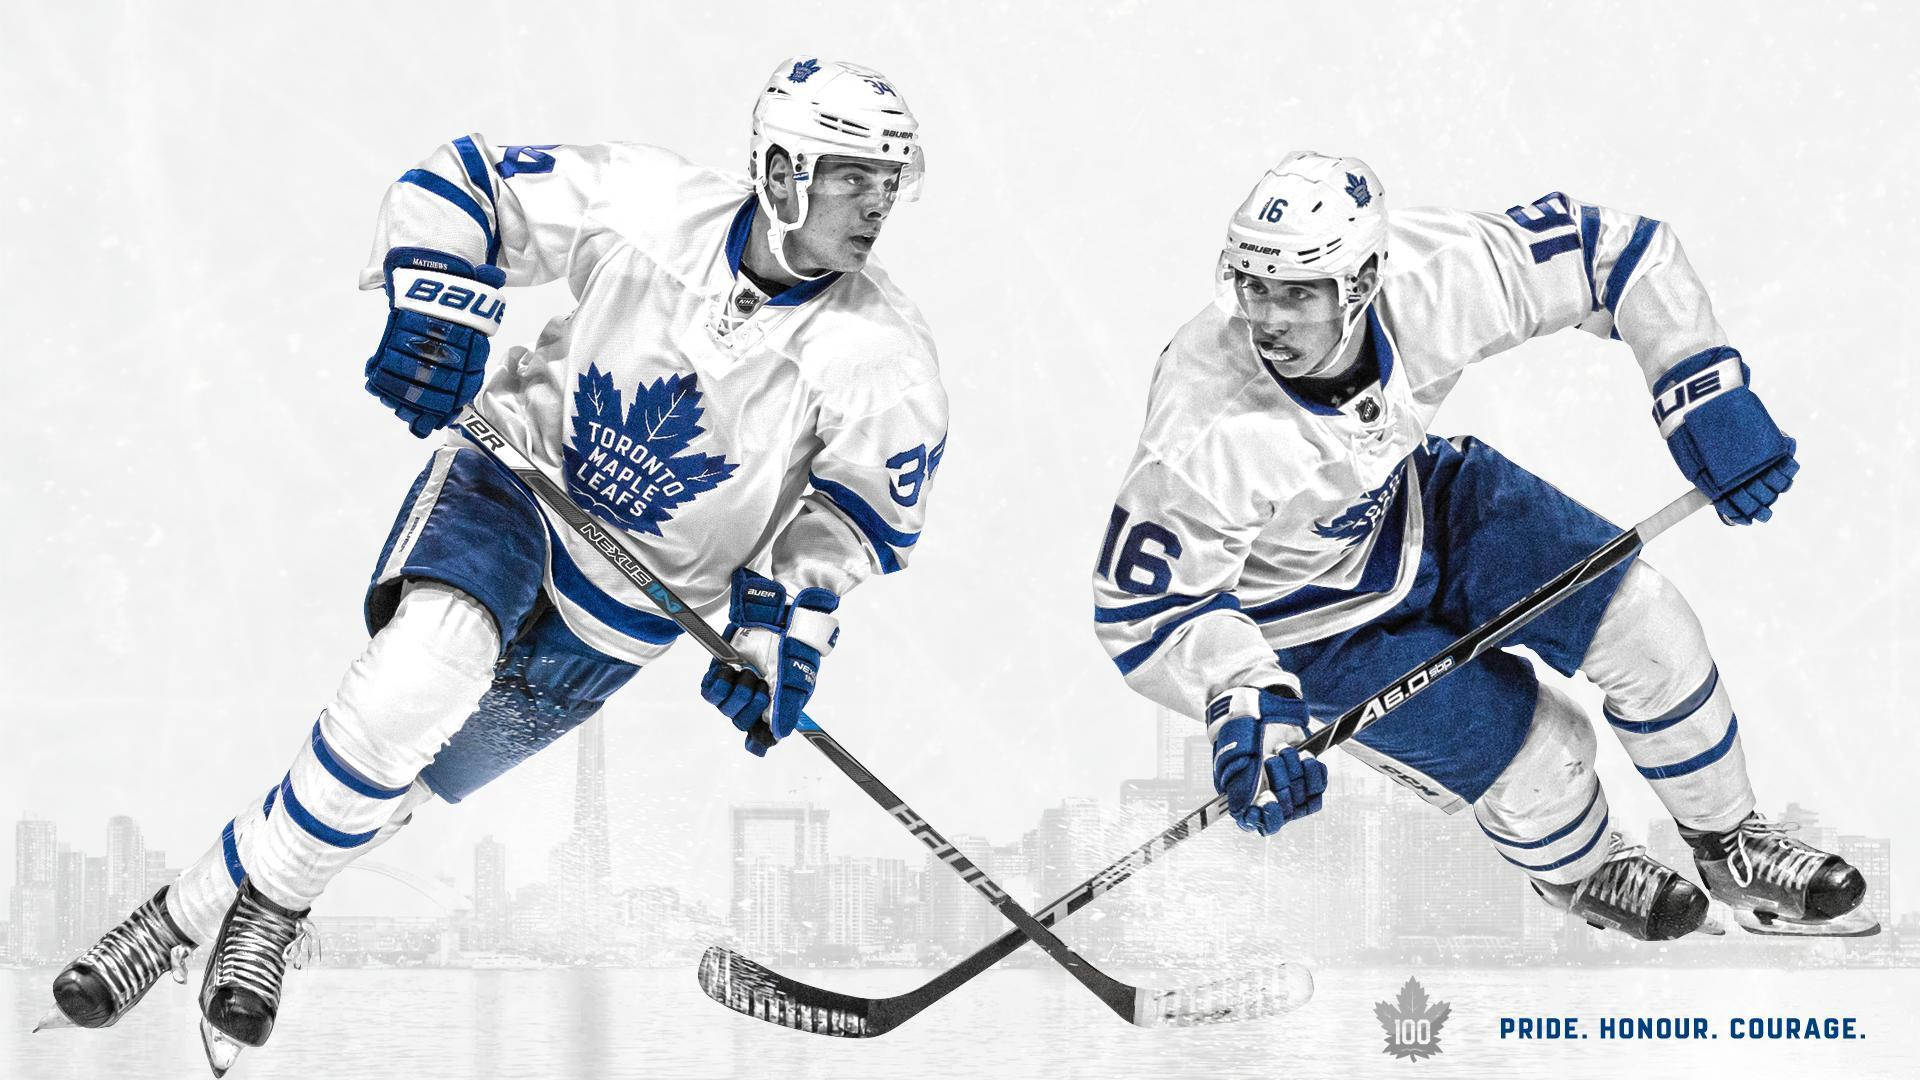 Austonmatthews Mitch Marner. (there Is No Need For Translation As These Are Proper Names And They Remain The Same In German.) Wallpaper